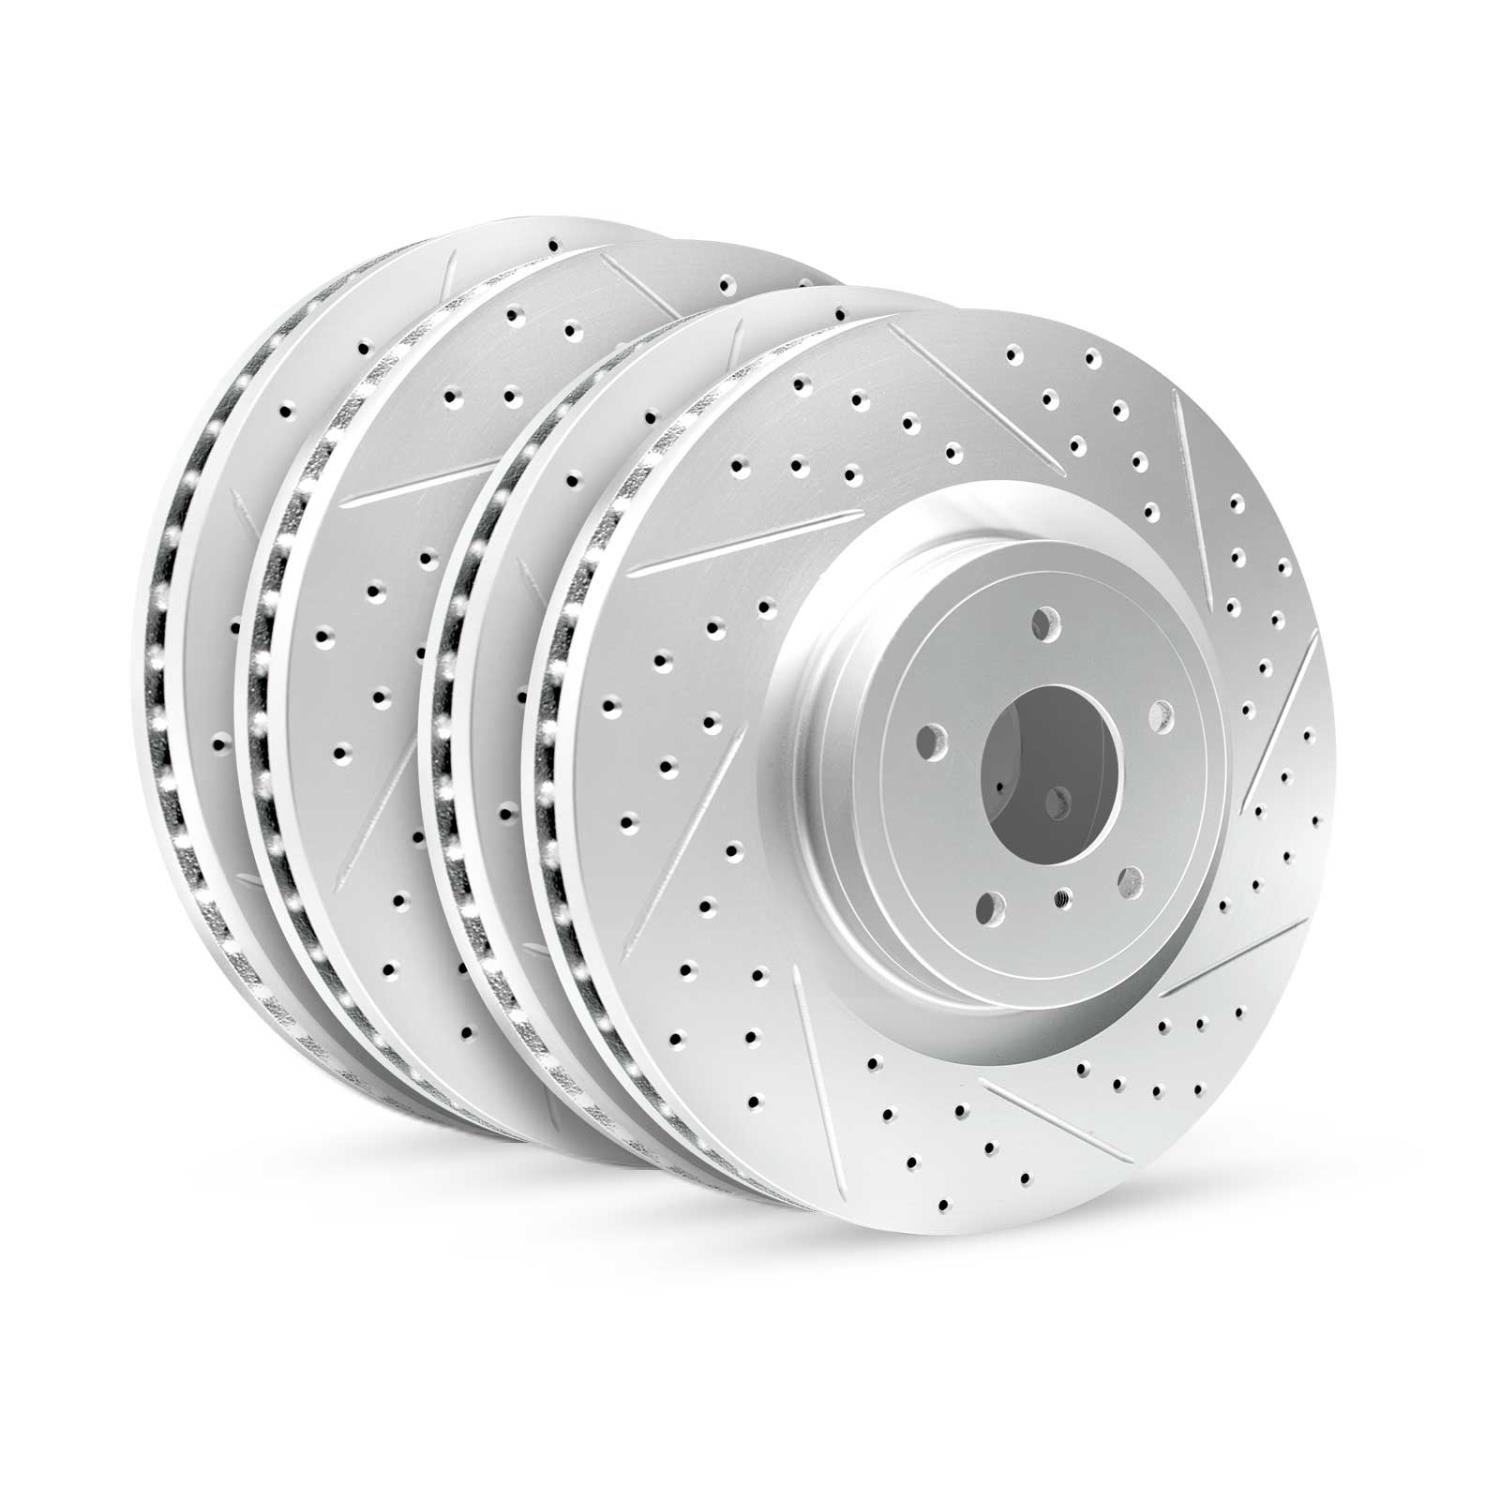 GEO-Carbon Drilled/Slotted Rotors, 1991-1999 BMW, Position: Front/Rear